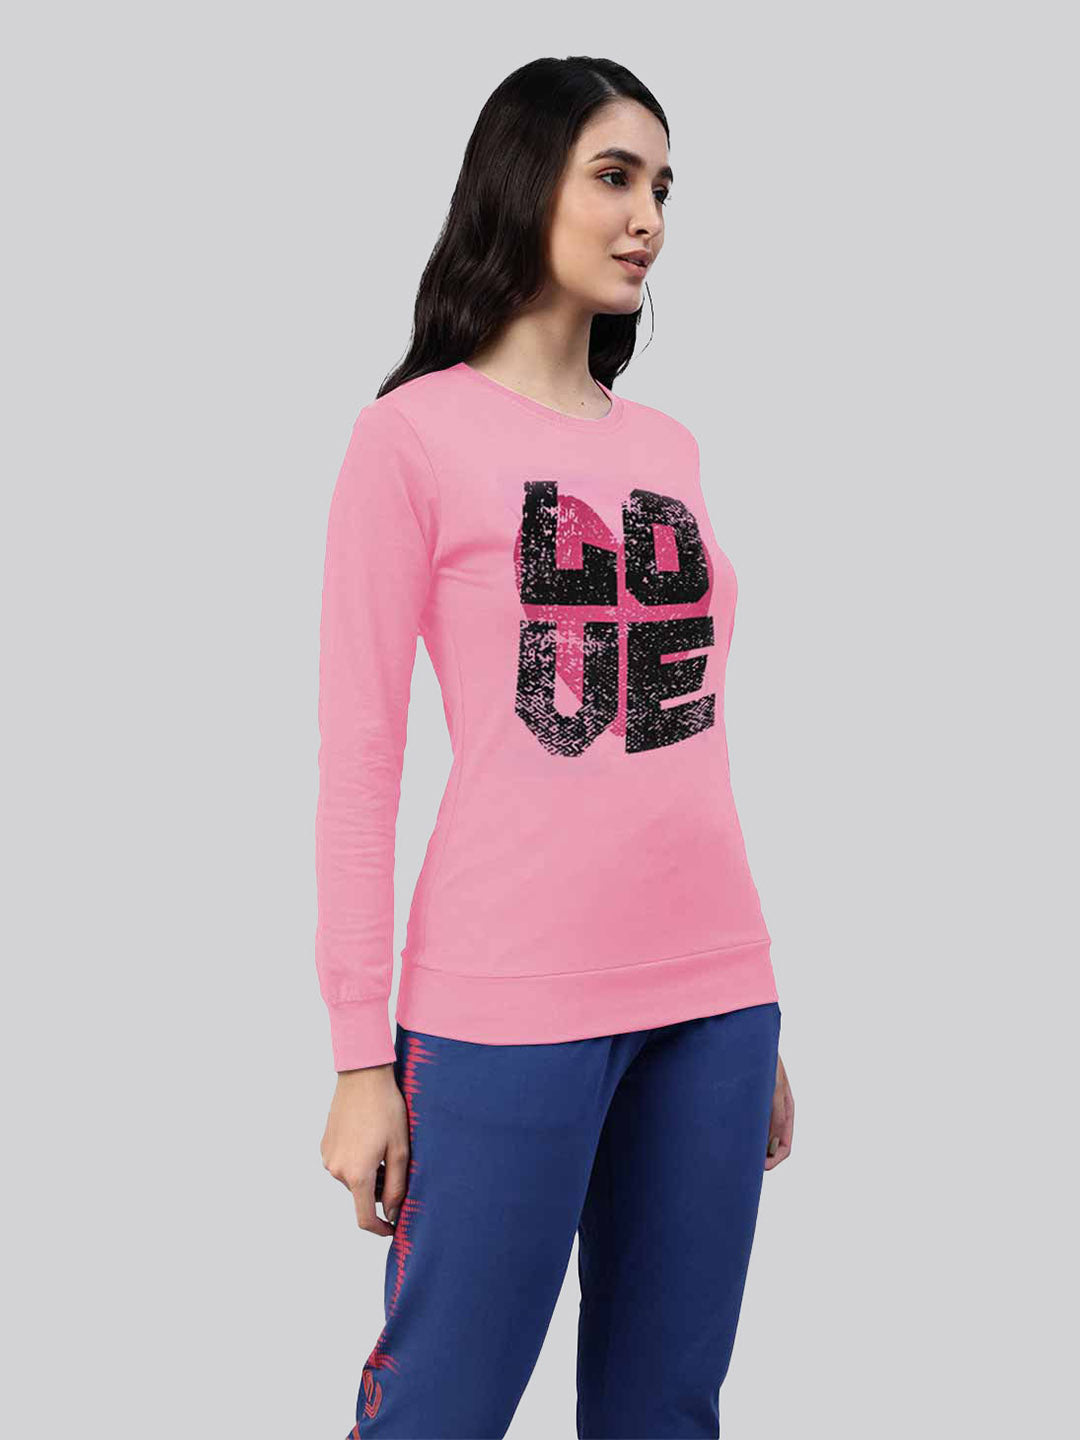 Pink printed round neck cotton t shirt for women